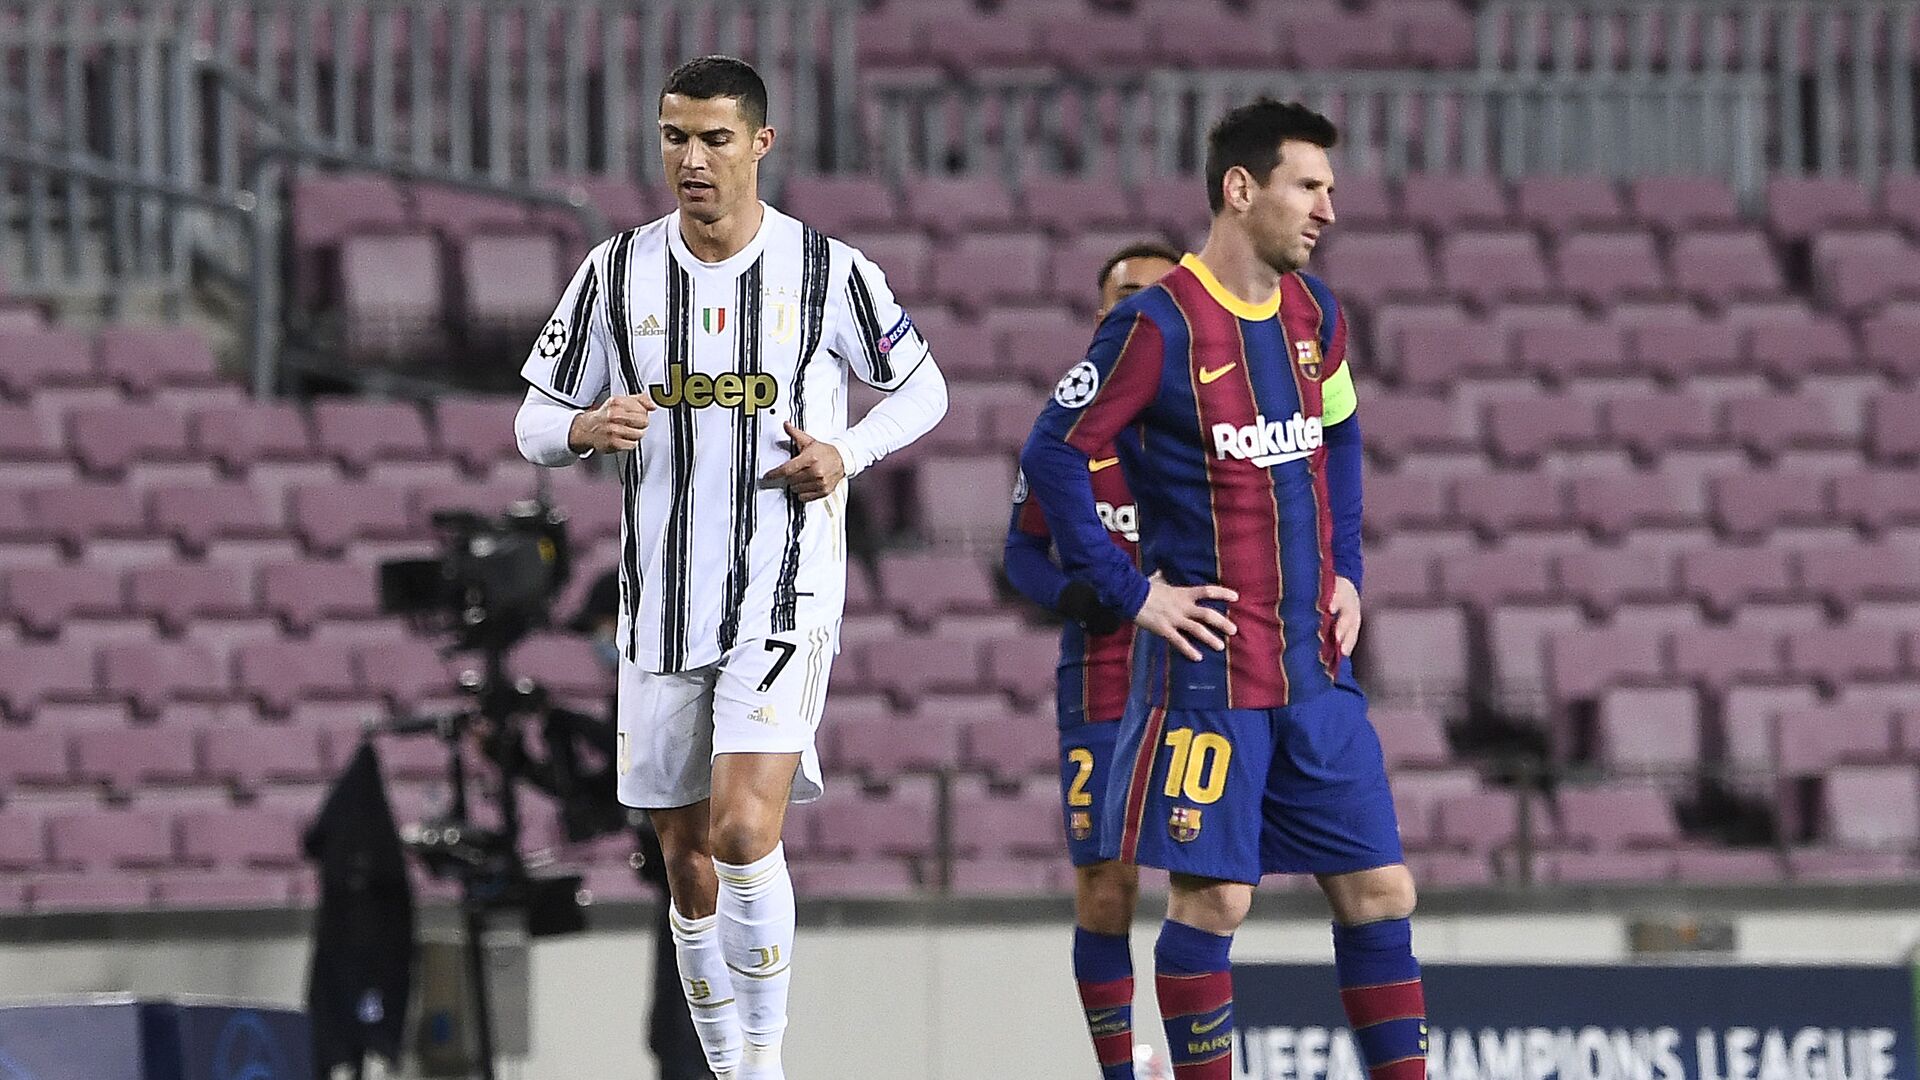 Juventus' Portuguese forward Cristiano Ronaldo (L) walks past Barcelona's Argentinian forward Lionel Messi during the UEFA Champions League group G football match between Barcelona and Juventus at the Camp Nou stadium in Barcelona on December 8, 2020 - Sputnik International, 1920, 12.05.2022